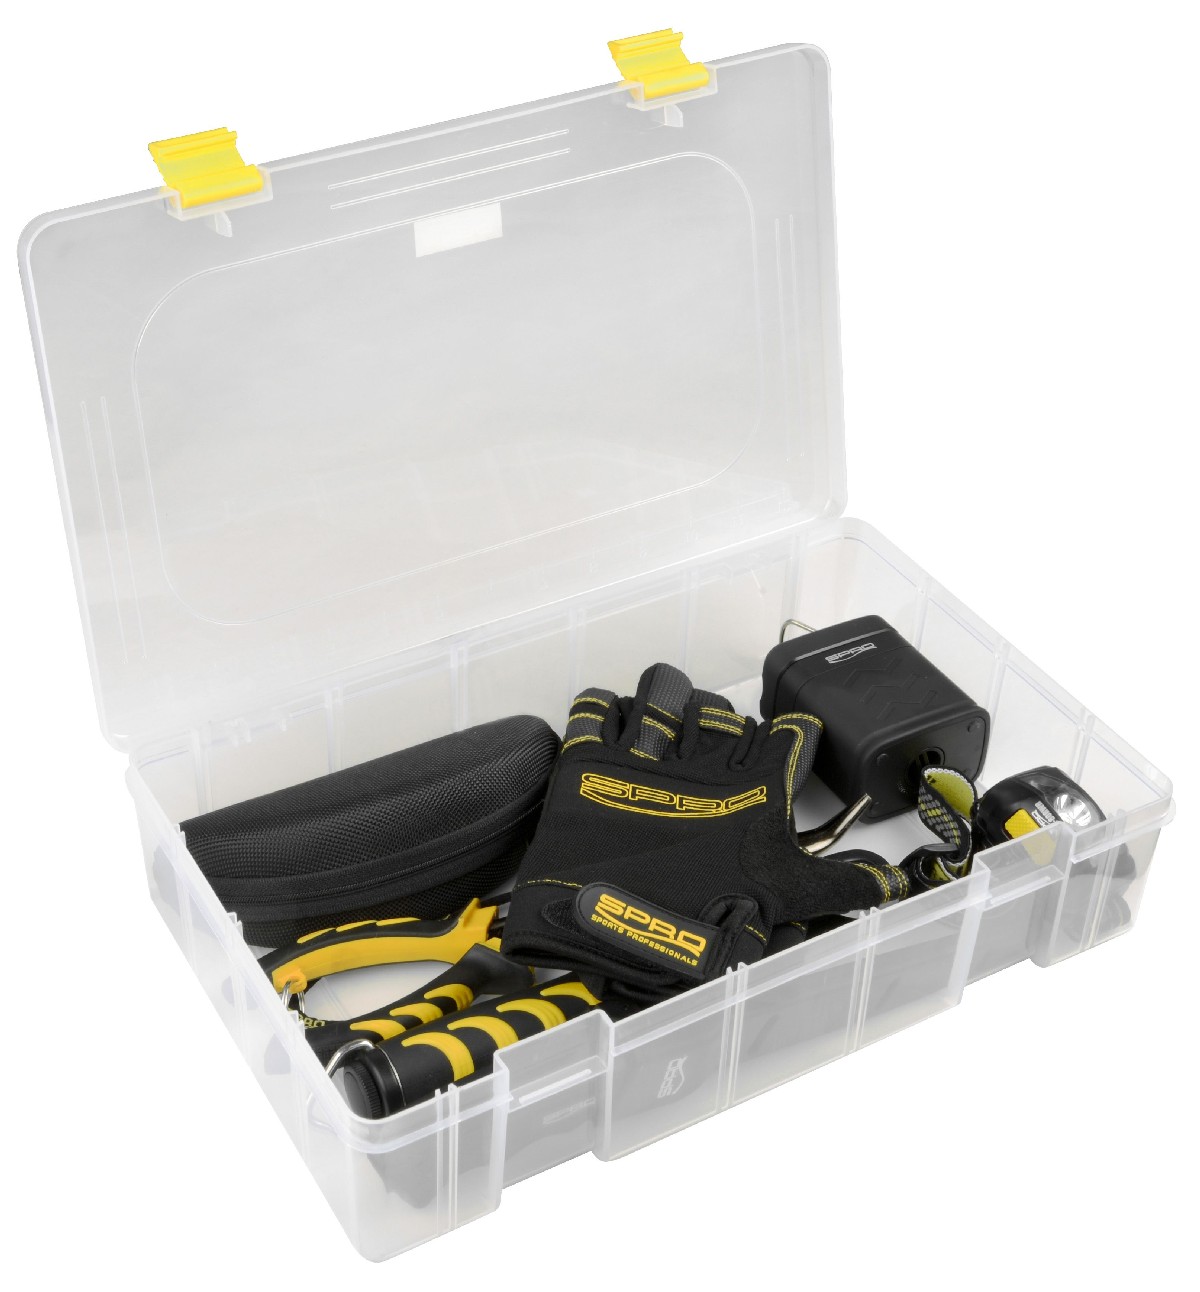 Spro Tackle Box 360 X 225 X 80 mm